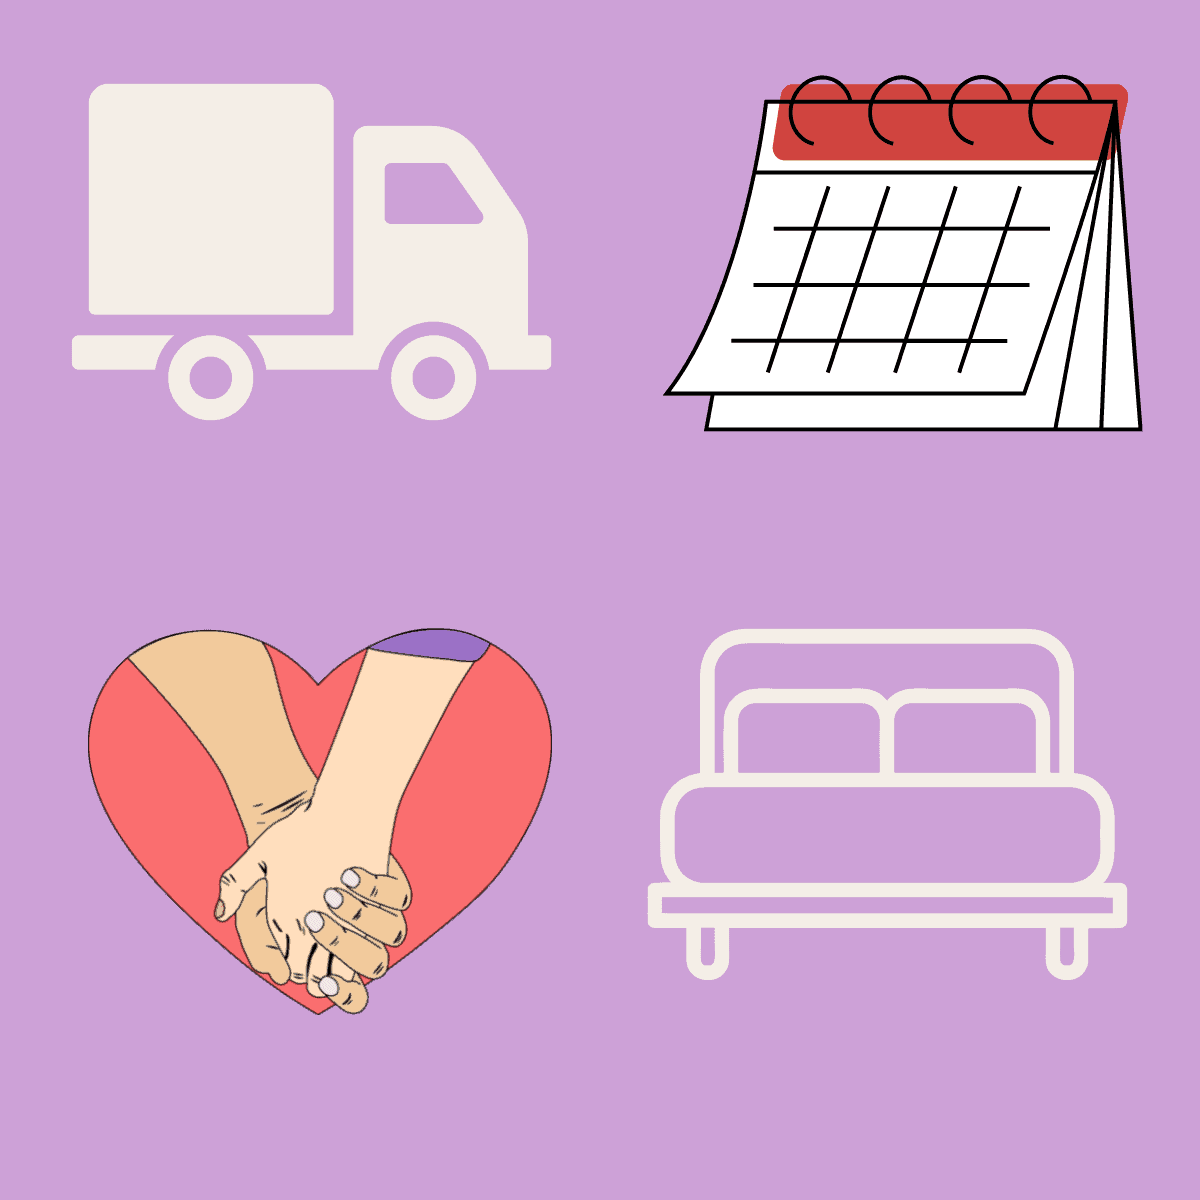 using a sperm bank long distance image. symbols - delivery truck, monthly calendar, two clasped hands inside heart, bed